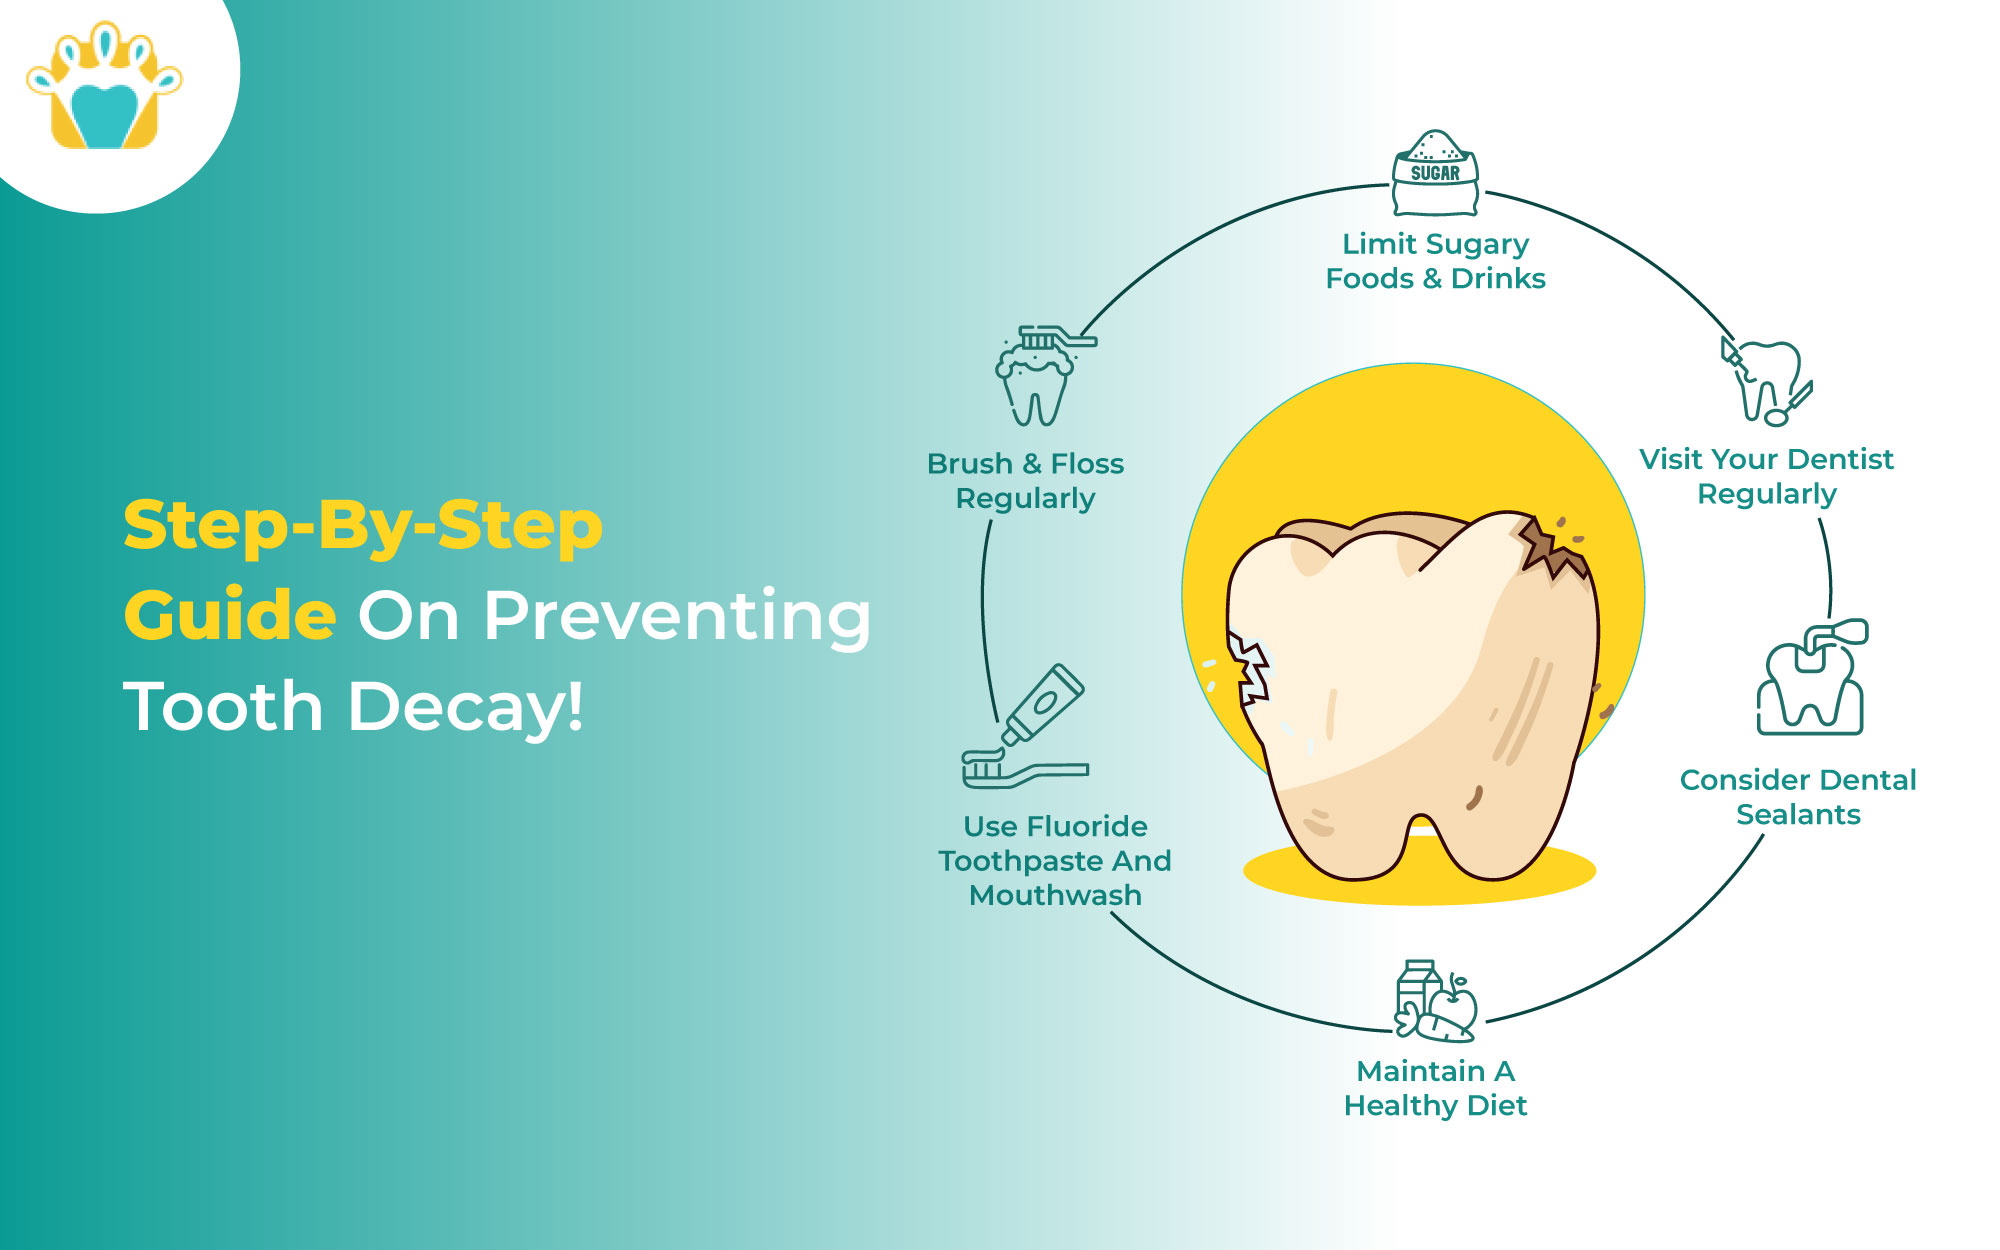 Step-by-step guide on preventing tooth decay